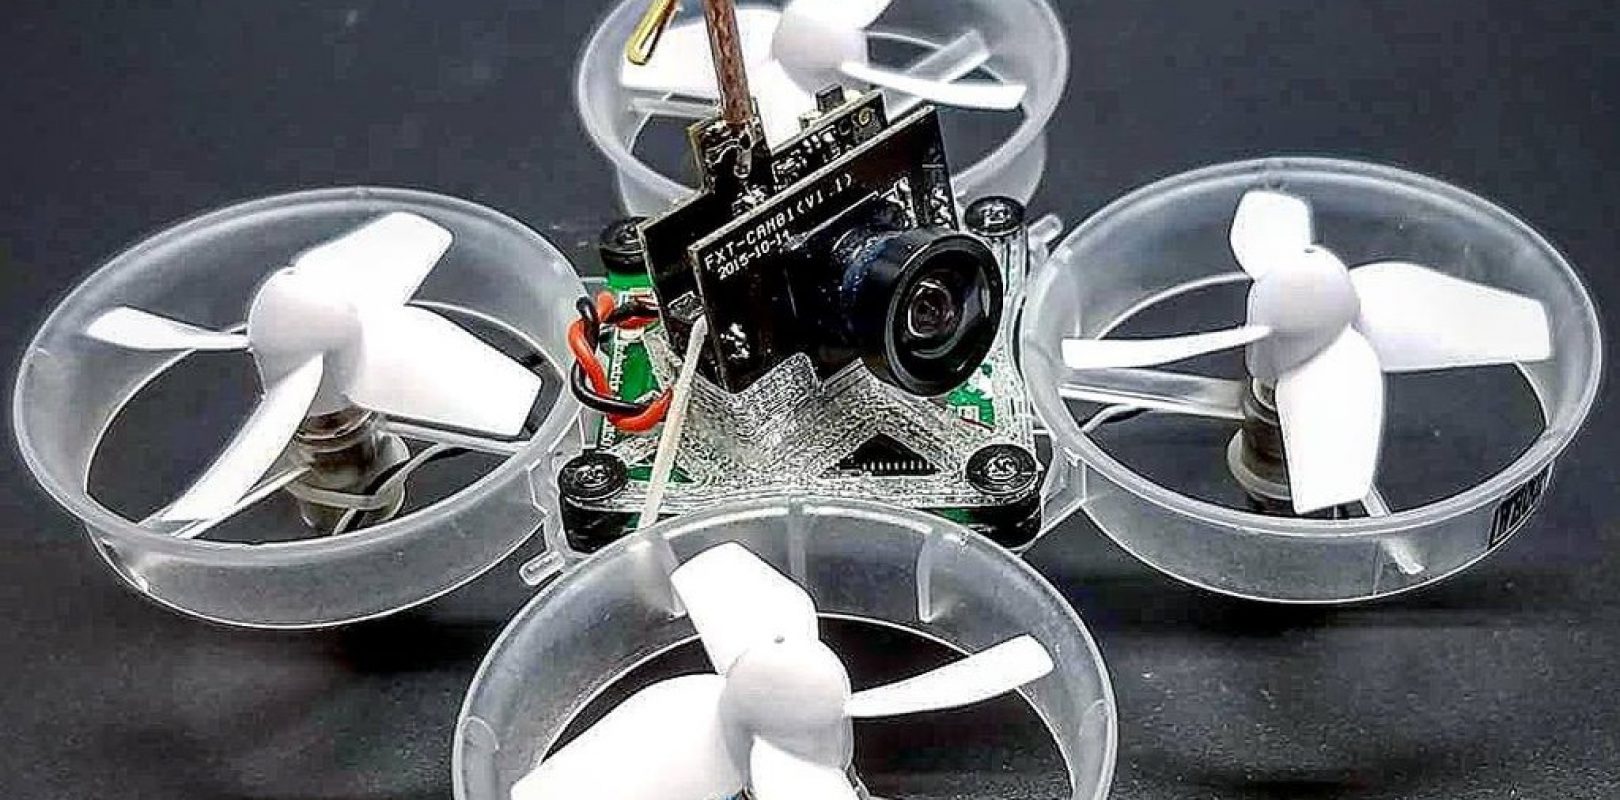 tiny whoop fpv